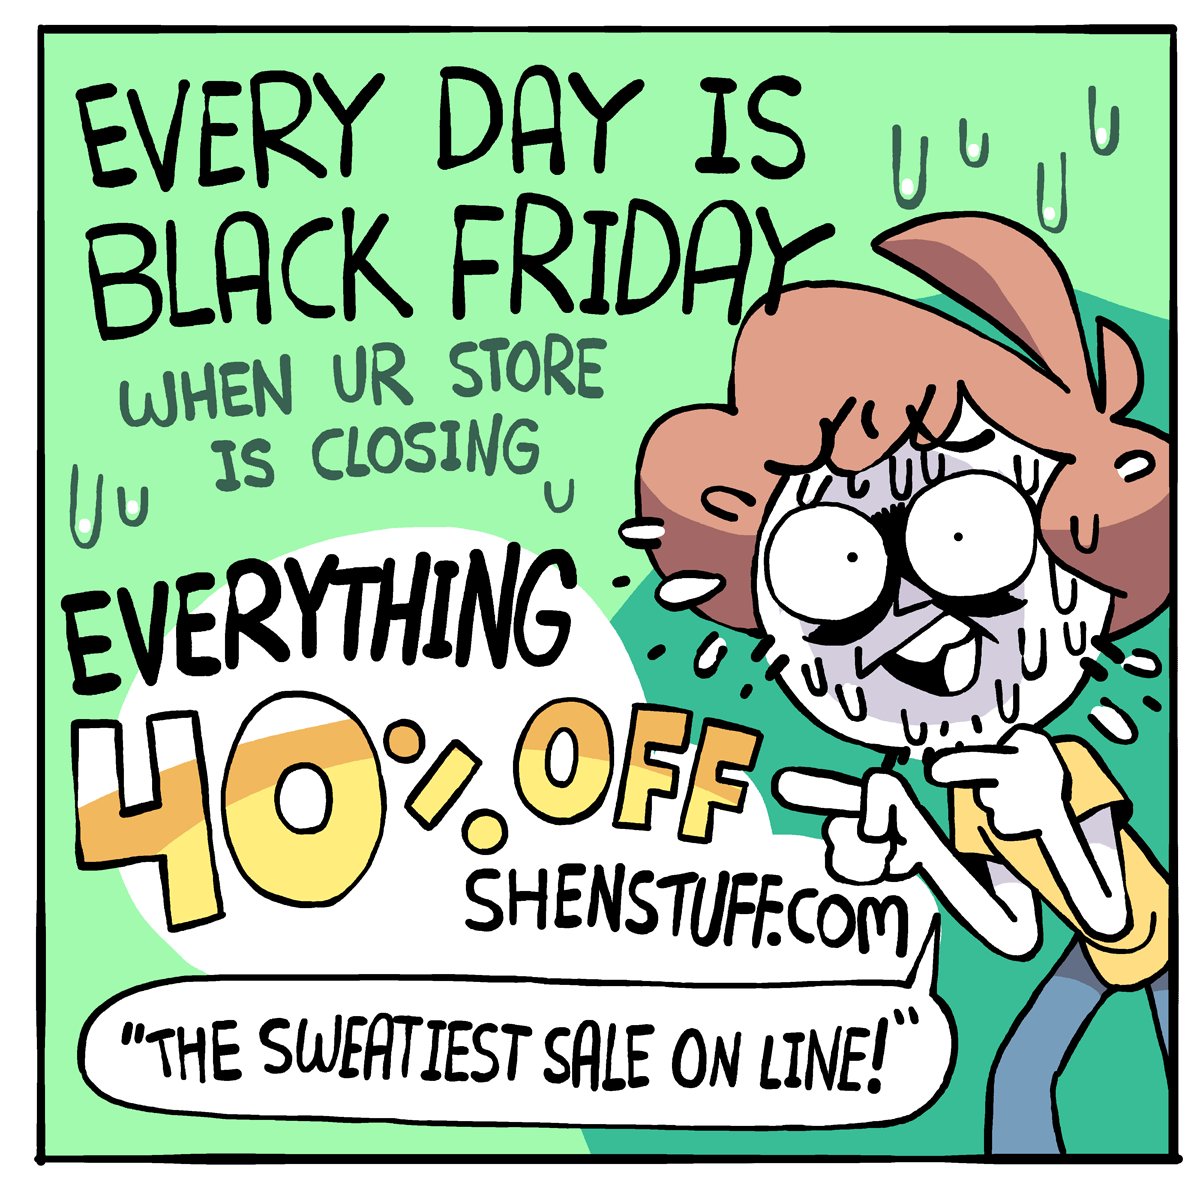 HEY there, i see you're doing preparing to do some black friday shopping? well, don't tell anybody, but i heard that https://t.co/xE8CyiiV6Q has some FANTASTIC deal--WAIT WAIT DON'T LEAVE 